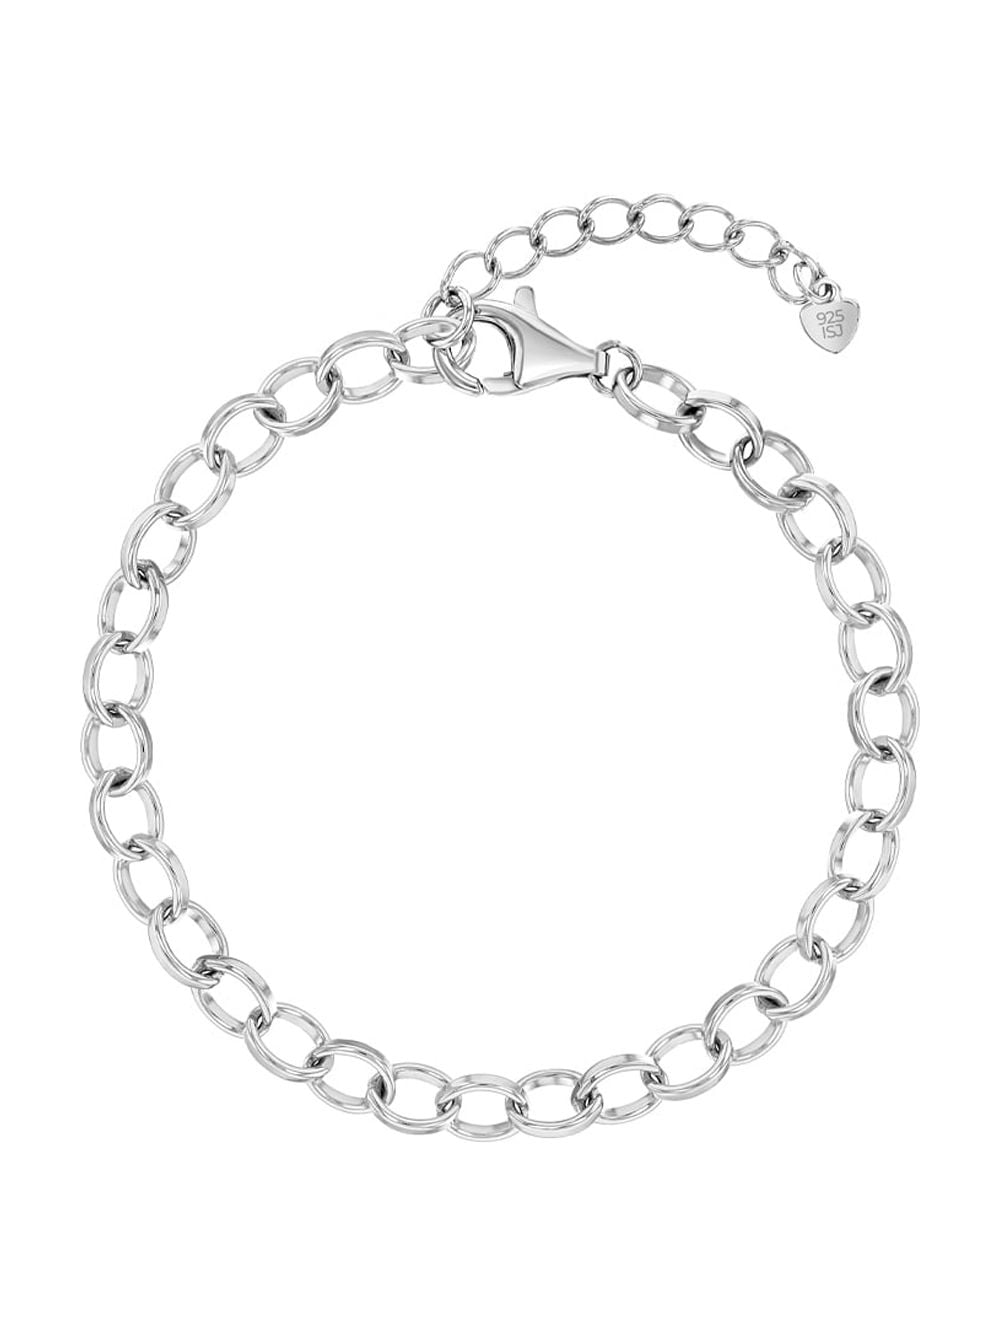 925 Sterling Silver 6 inch Traditional Chain Charm Bracelet for Young Girls and Boys, Girl's